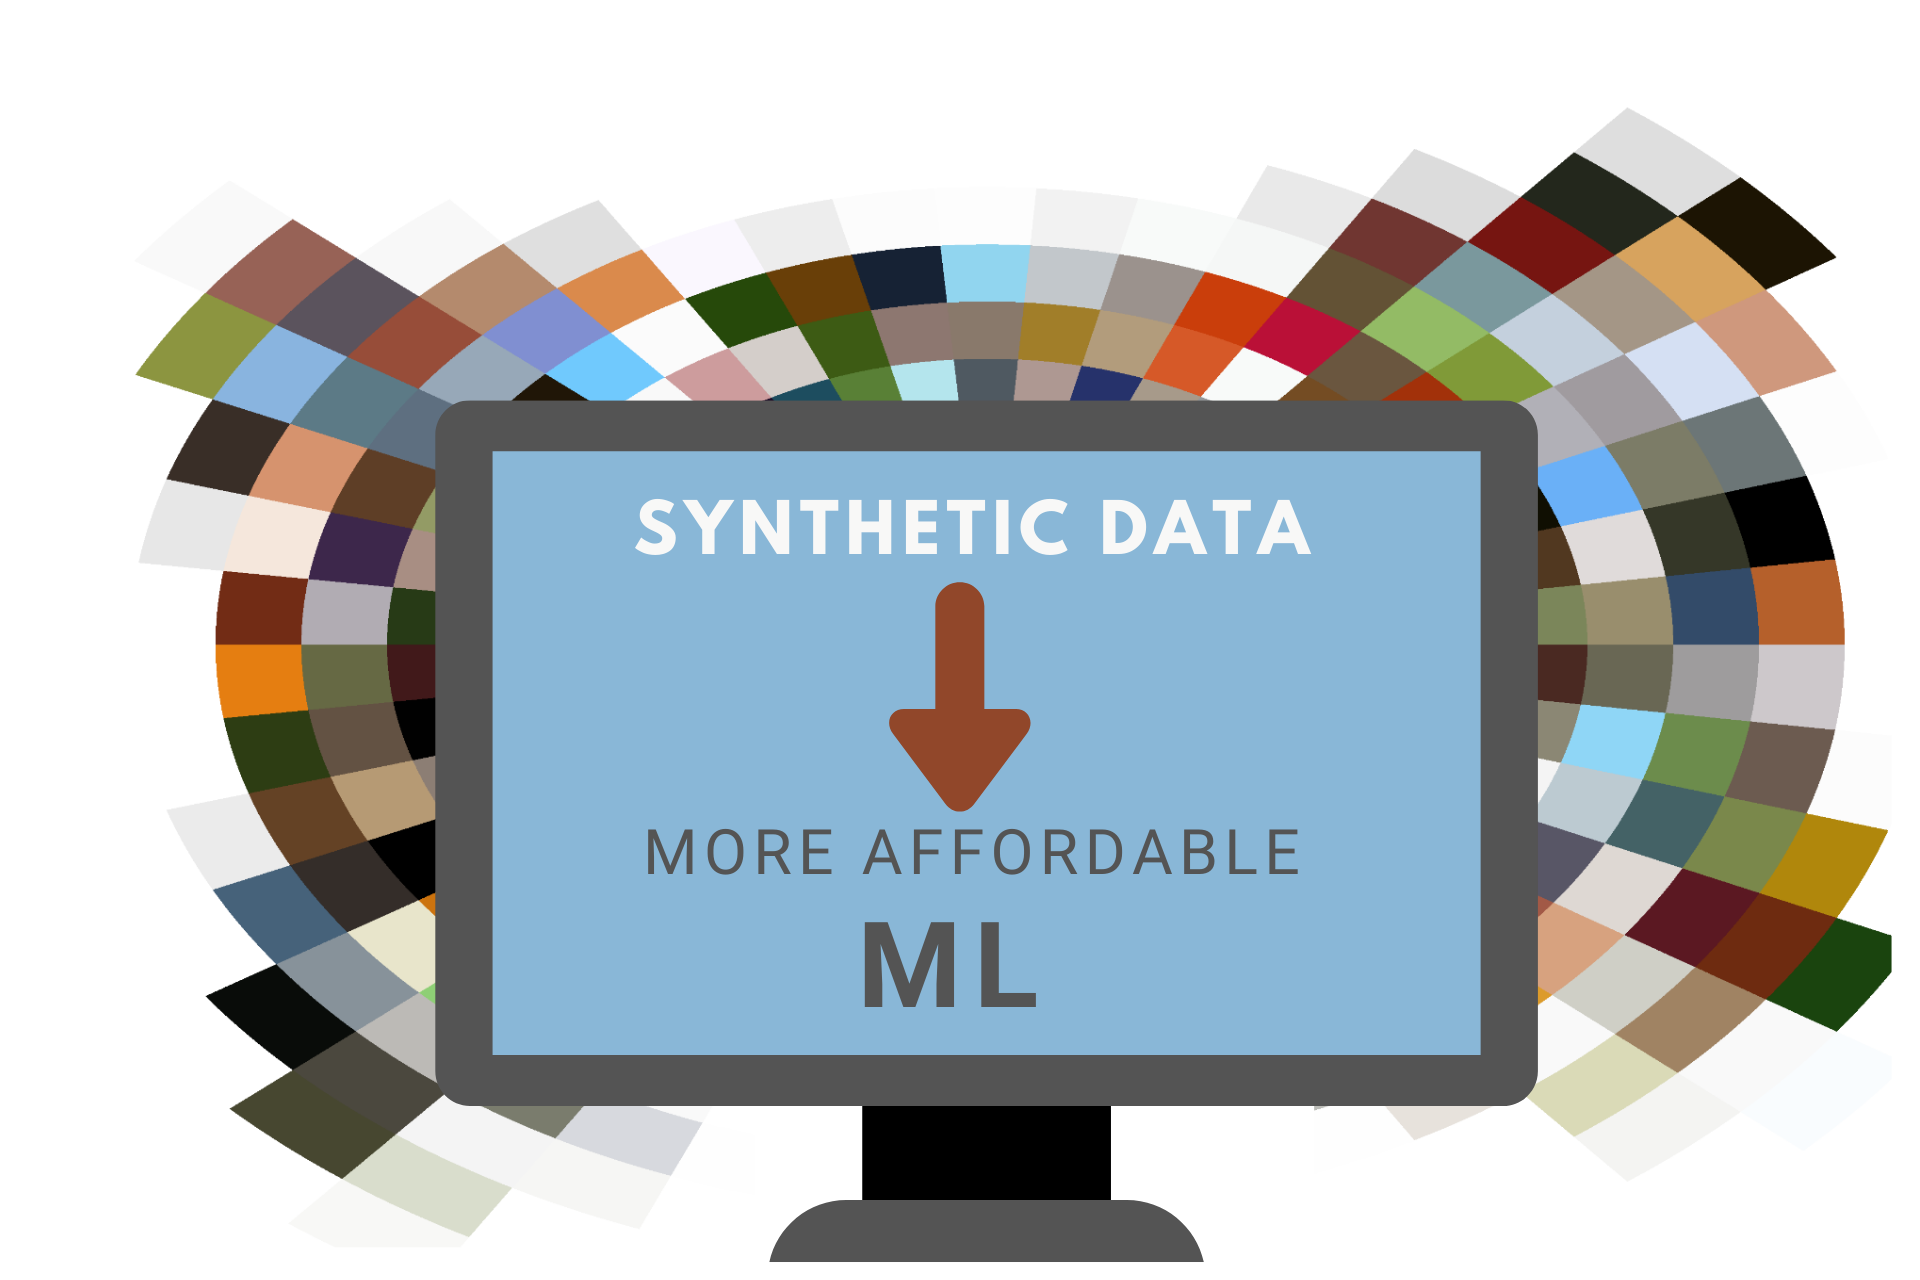 Synthetic Data leads to more affordable ML